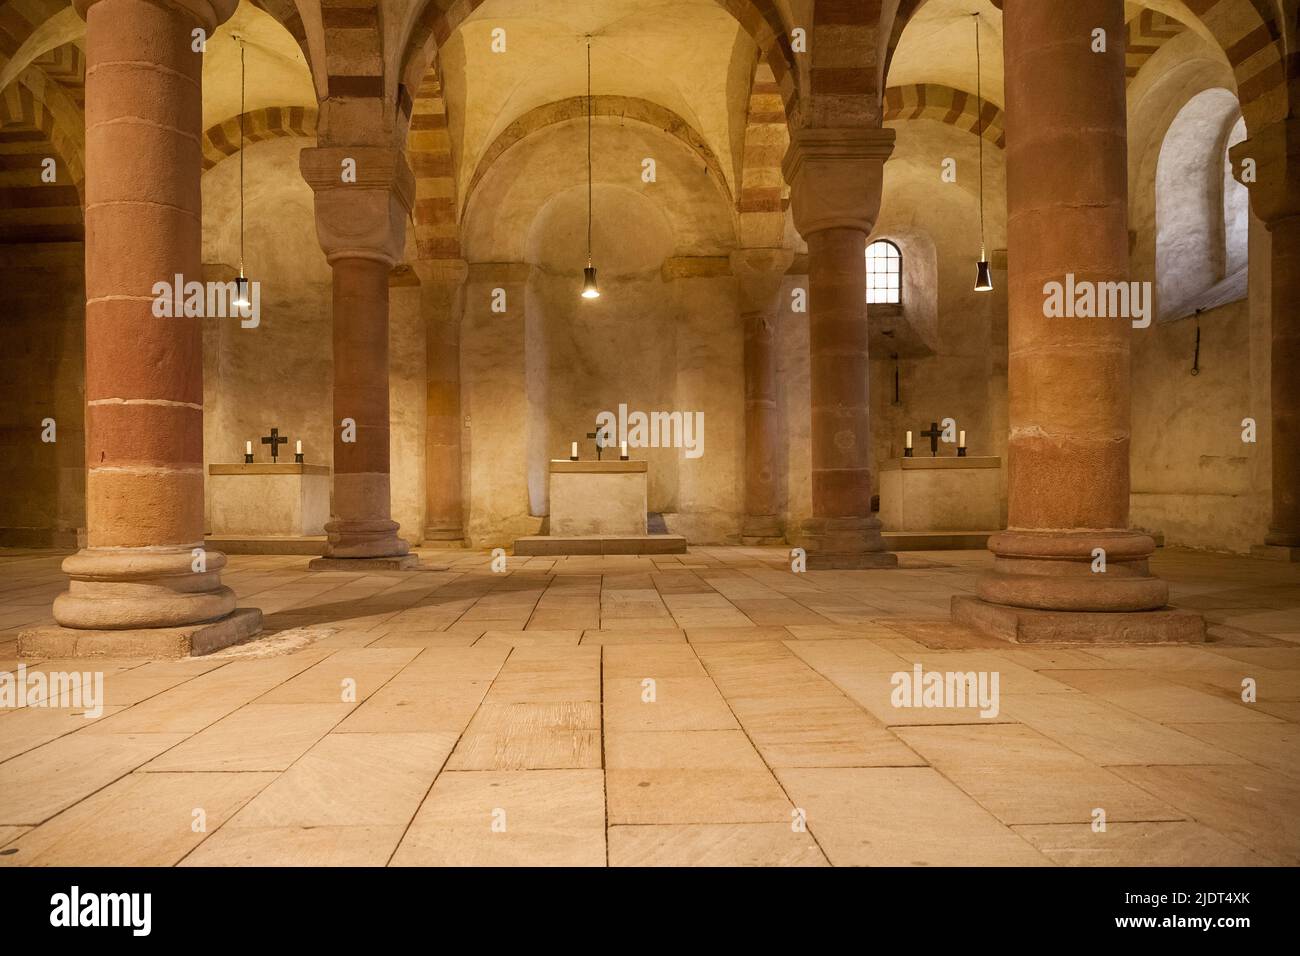 Great view of the three altars inside the southern transept of the Romanesque columned hall crypt of the famous Speyer Cathedral in the state of... Stock Photo